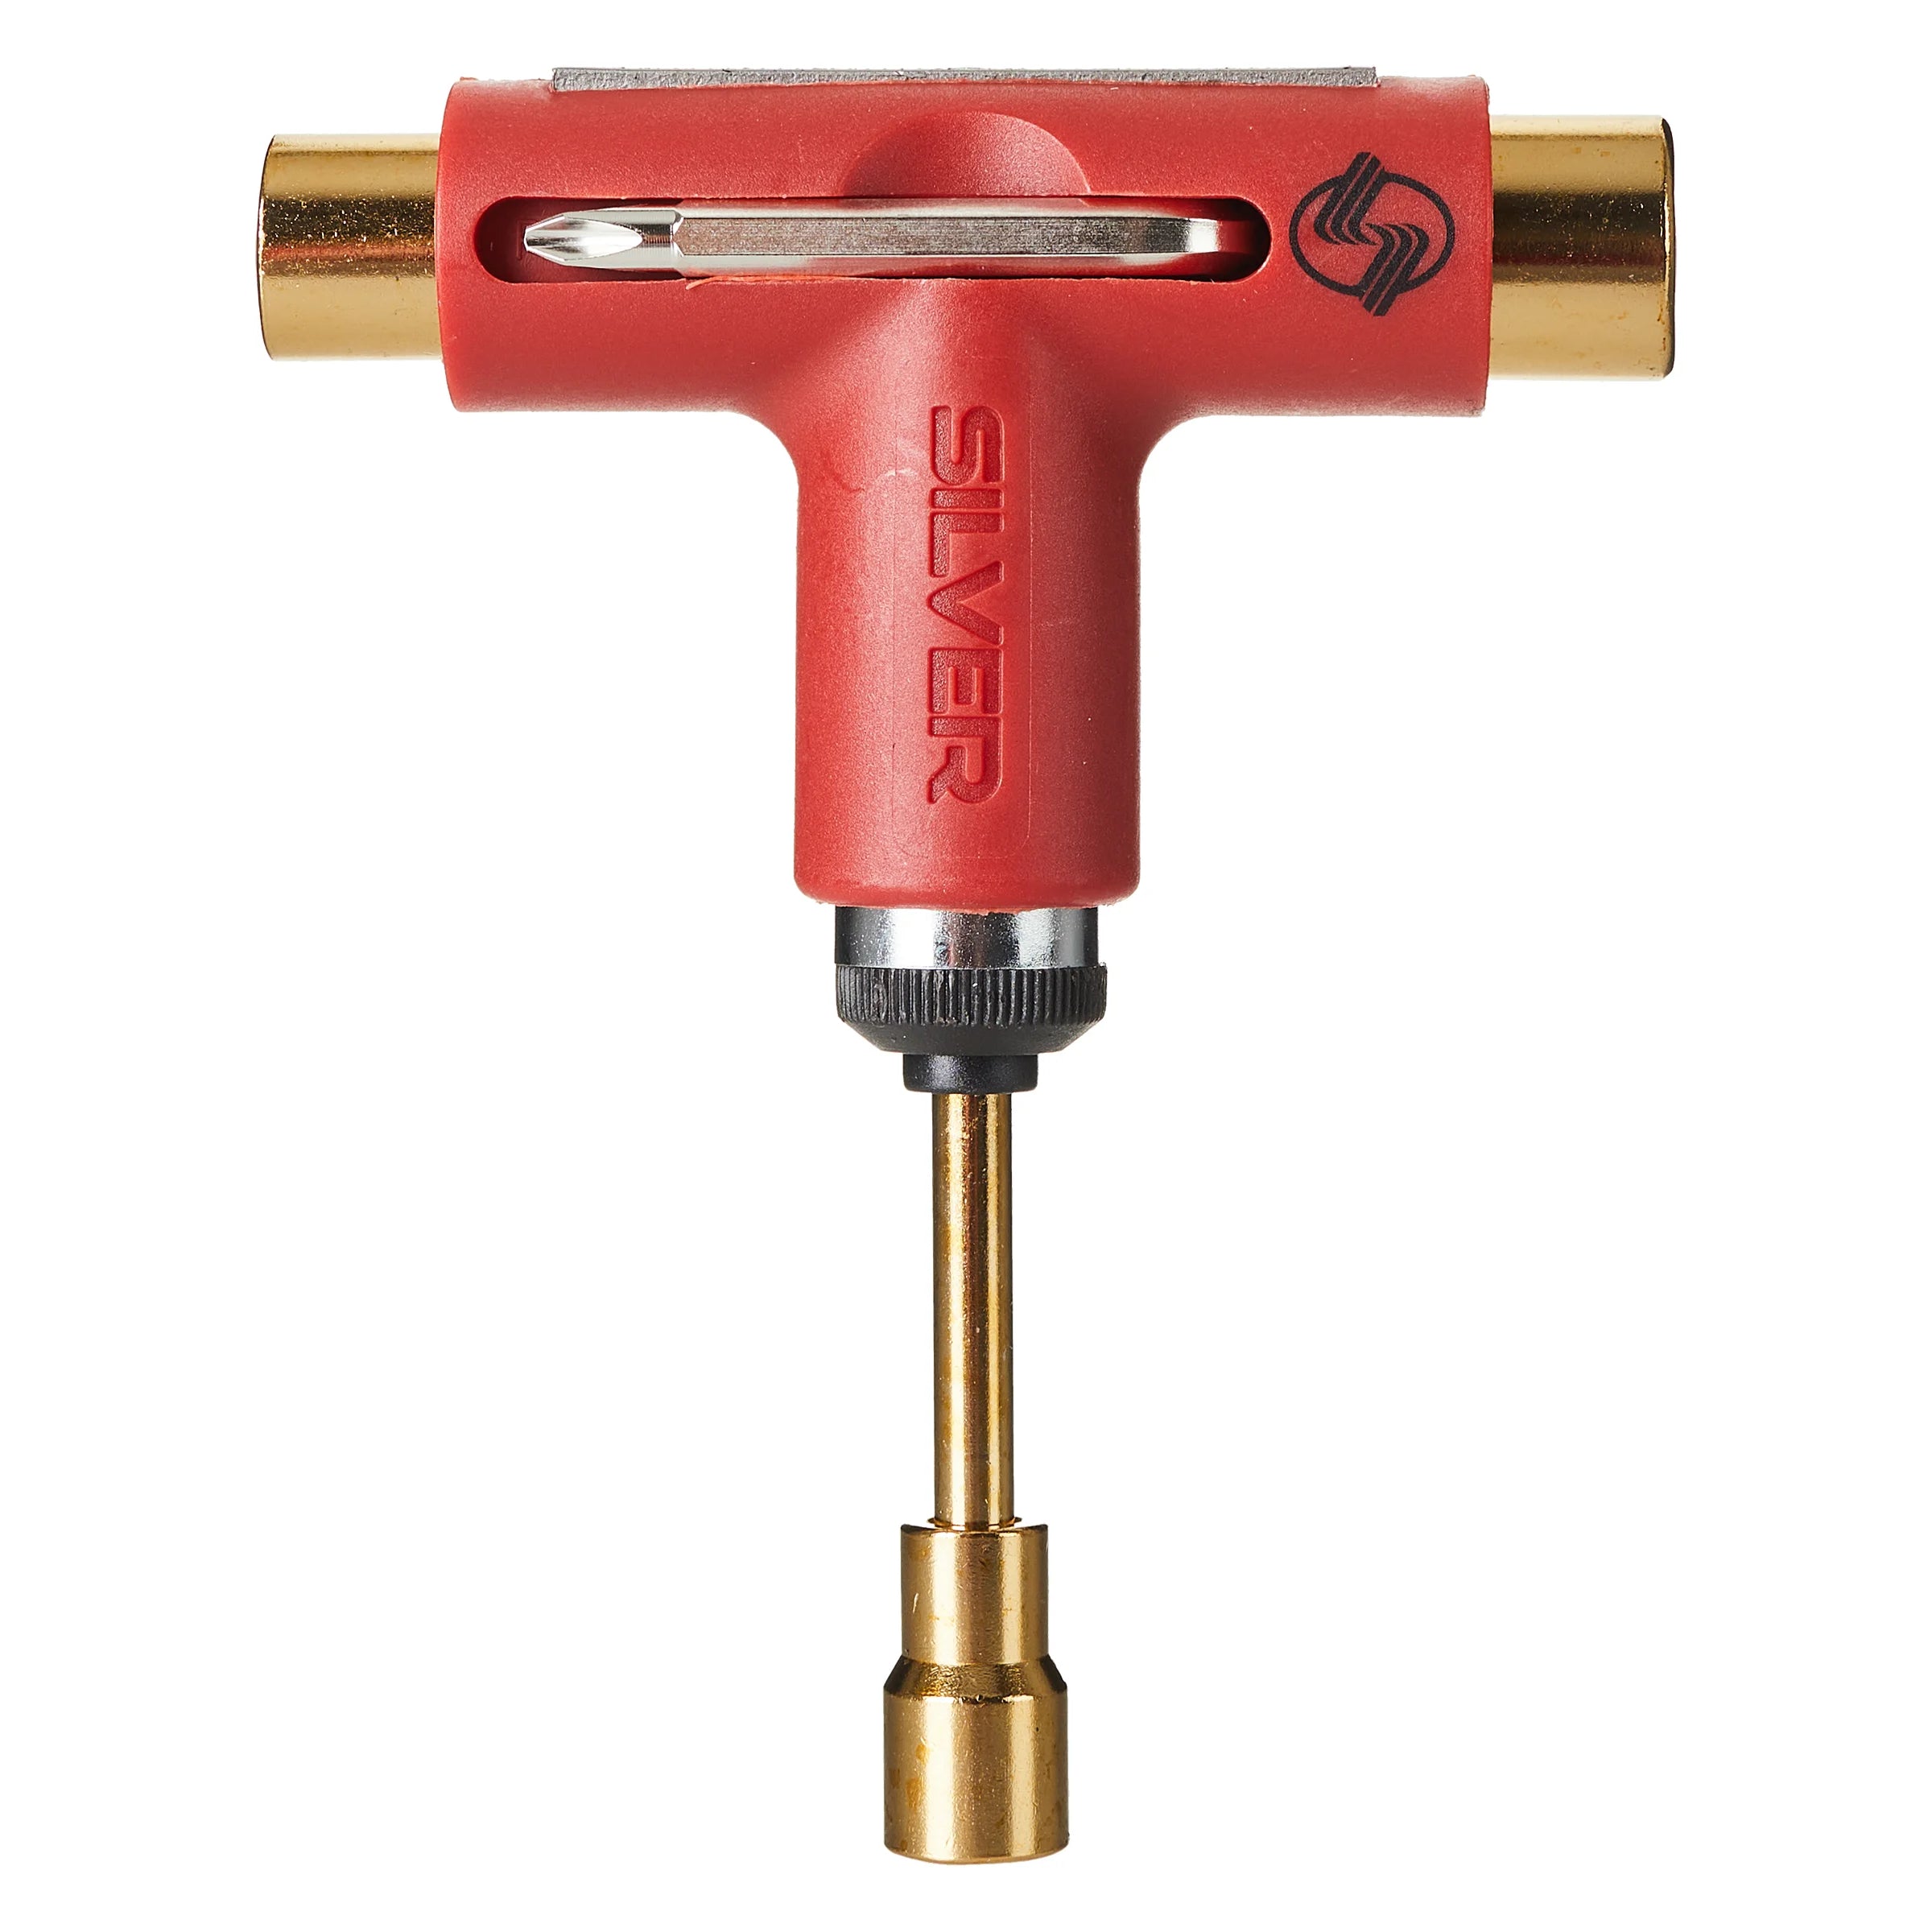 Silver Ratchet Skateboard Tool - Red/Gold